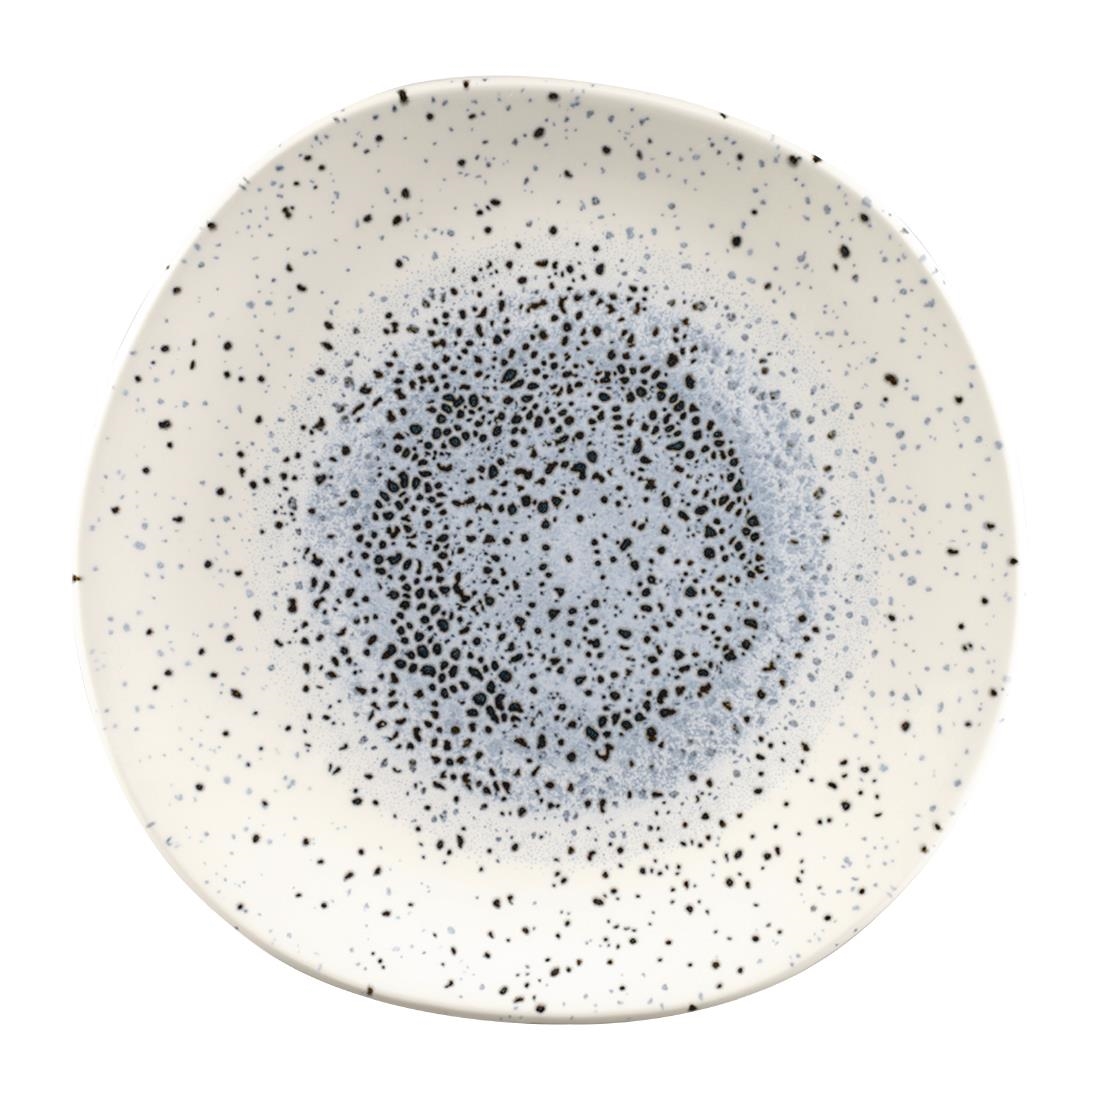 Churchill Studio Prints Mineral Blue Centre Organic Round Plates 264mm (Pack of 12)